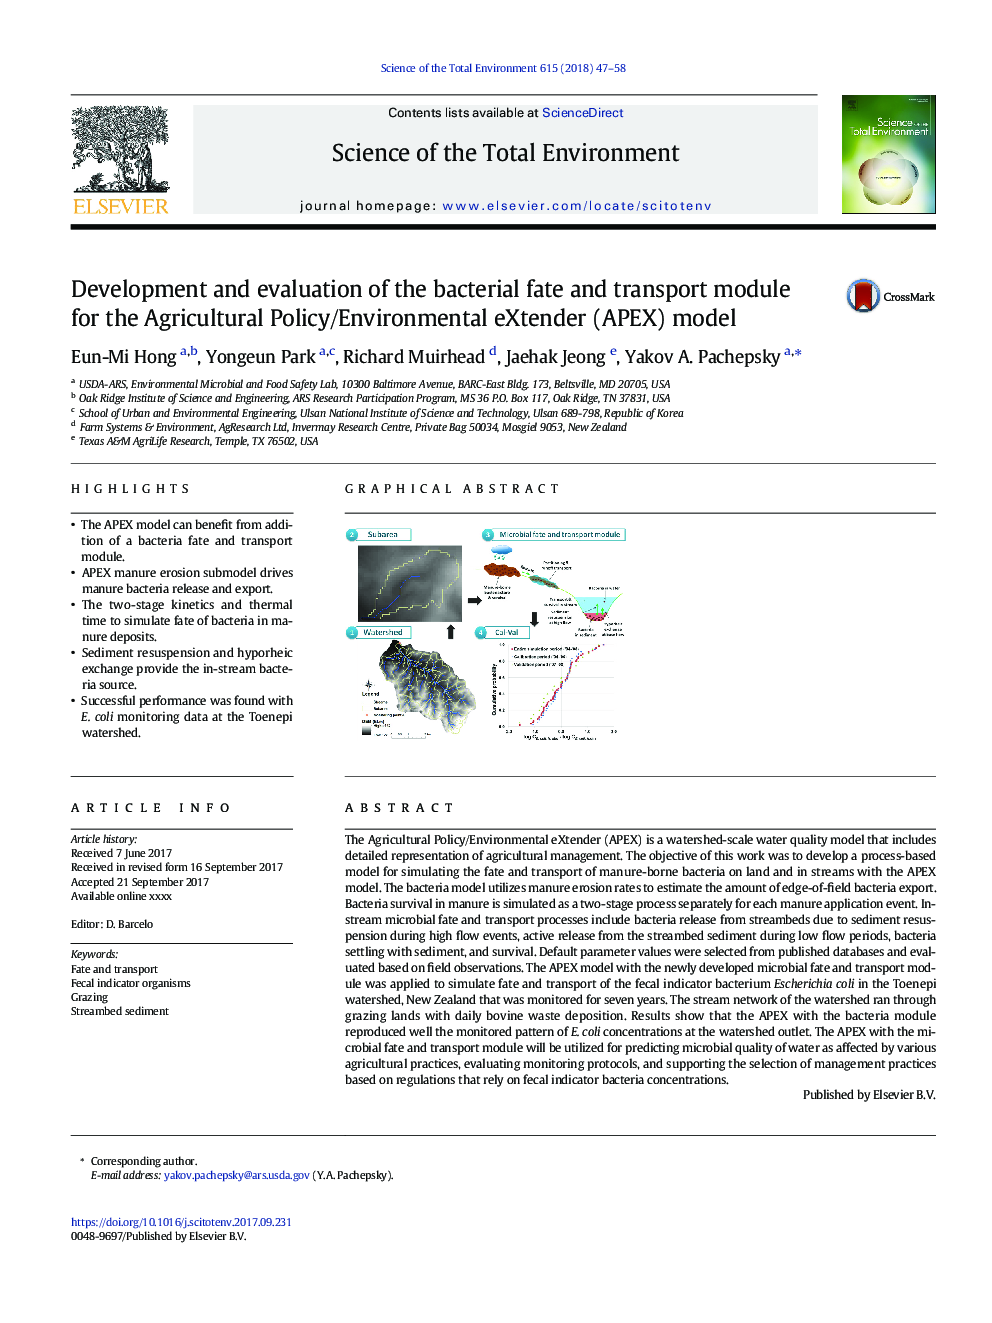 Development and evaluation of the bacterial fate and transport module for the Agricultural Policy/Environmental eXtender (APEX) model